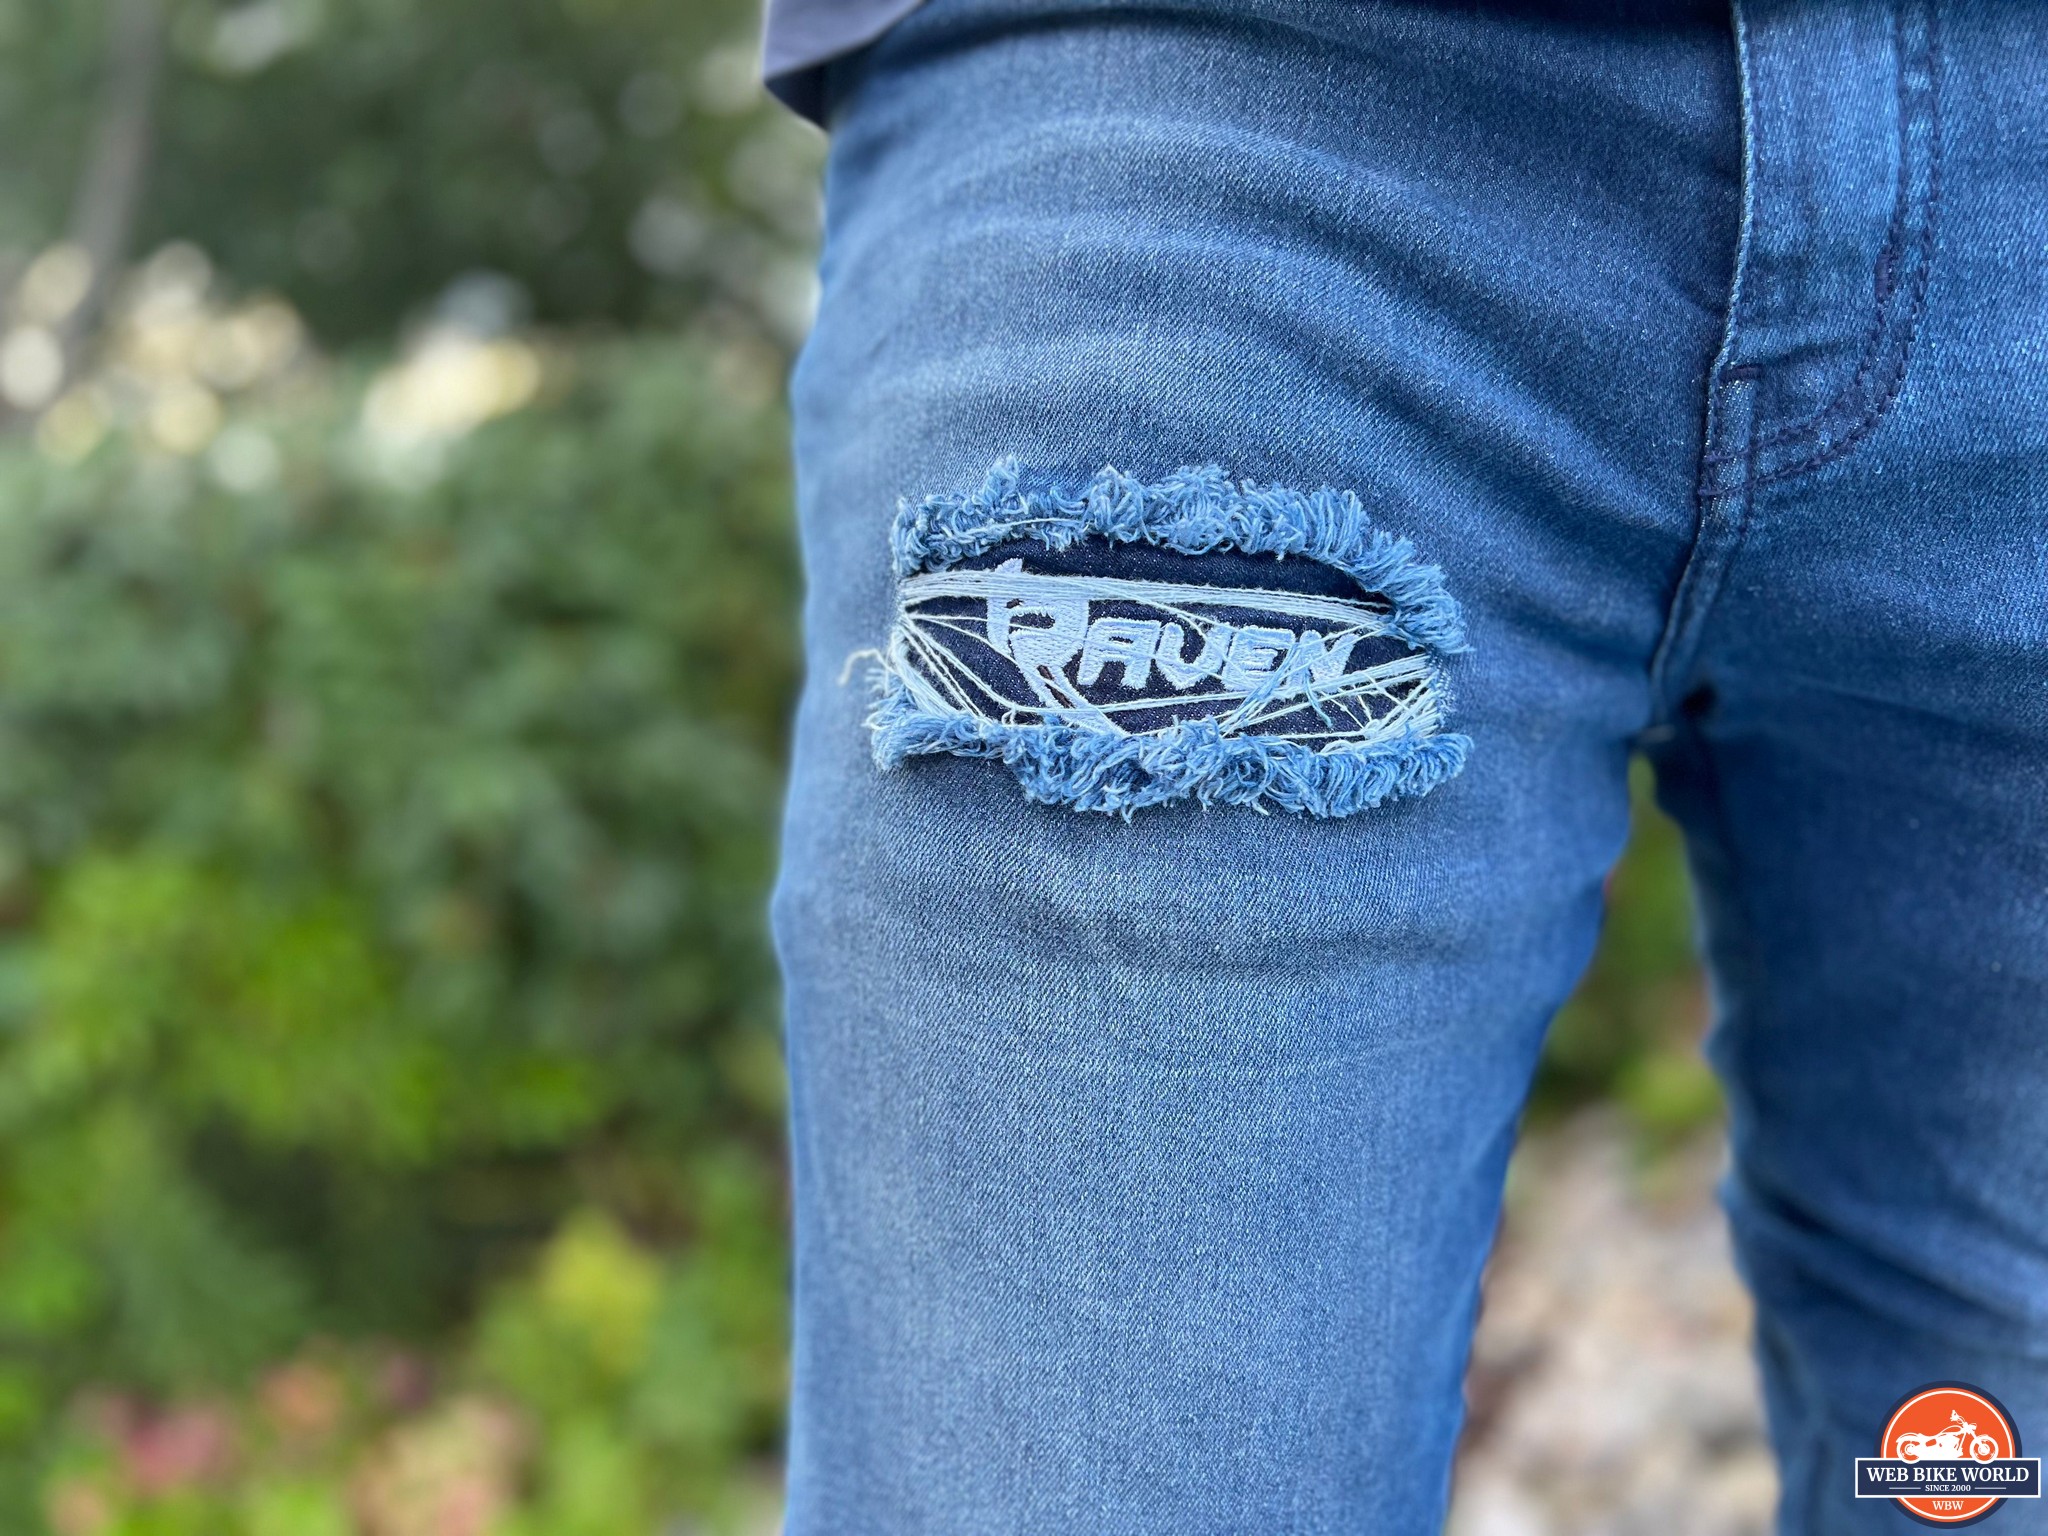 Denim square shape with stitches. Torn jean patch with seam